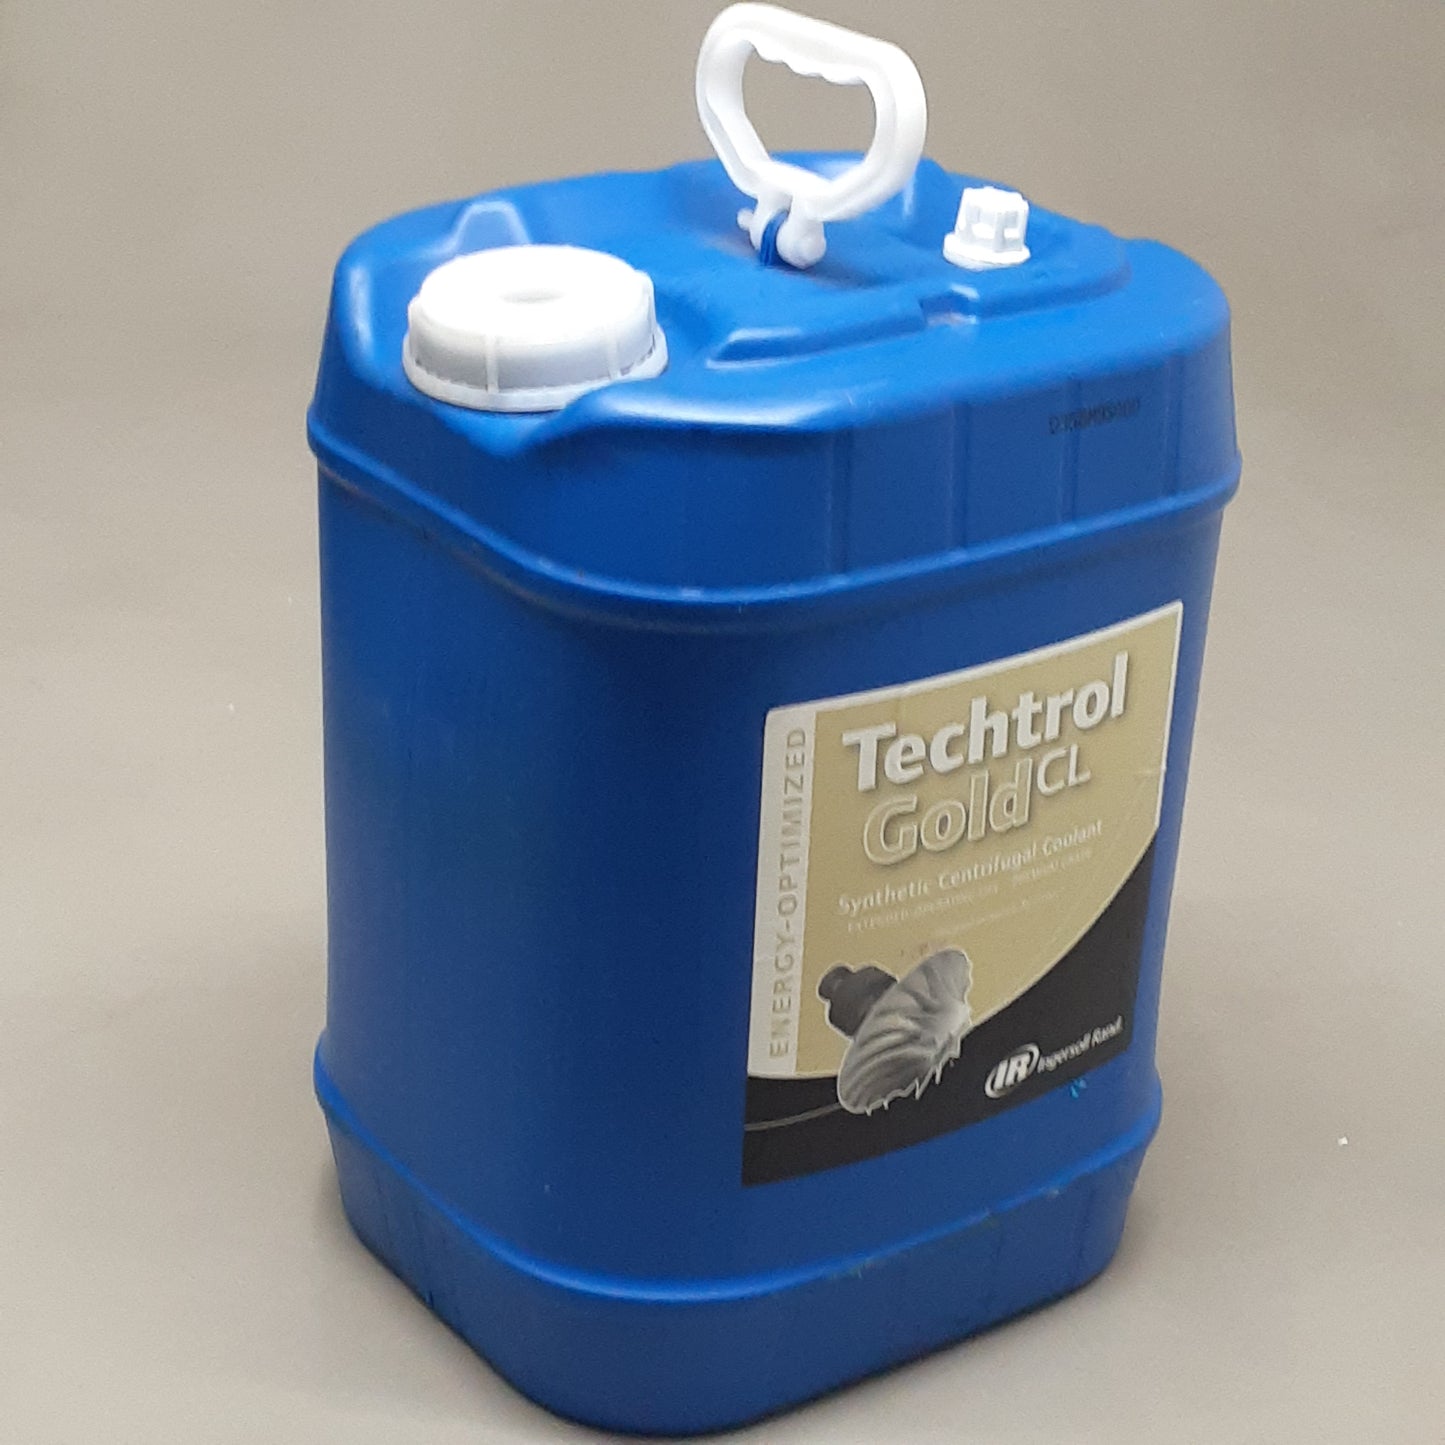 INGERSOLL RAND Techtrol GOLD Energy Optimized Coolant Fluid 20L (New Other)